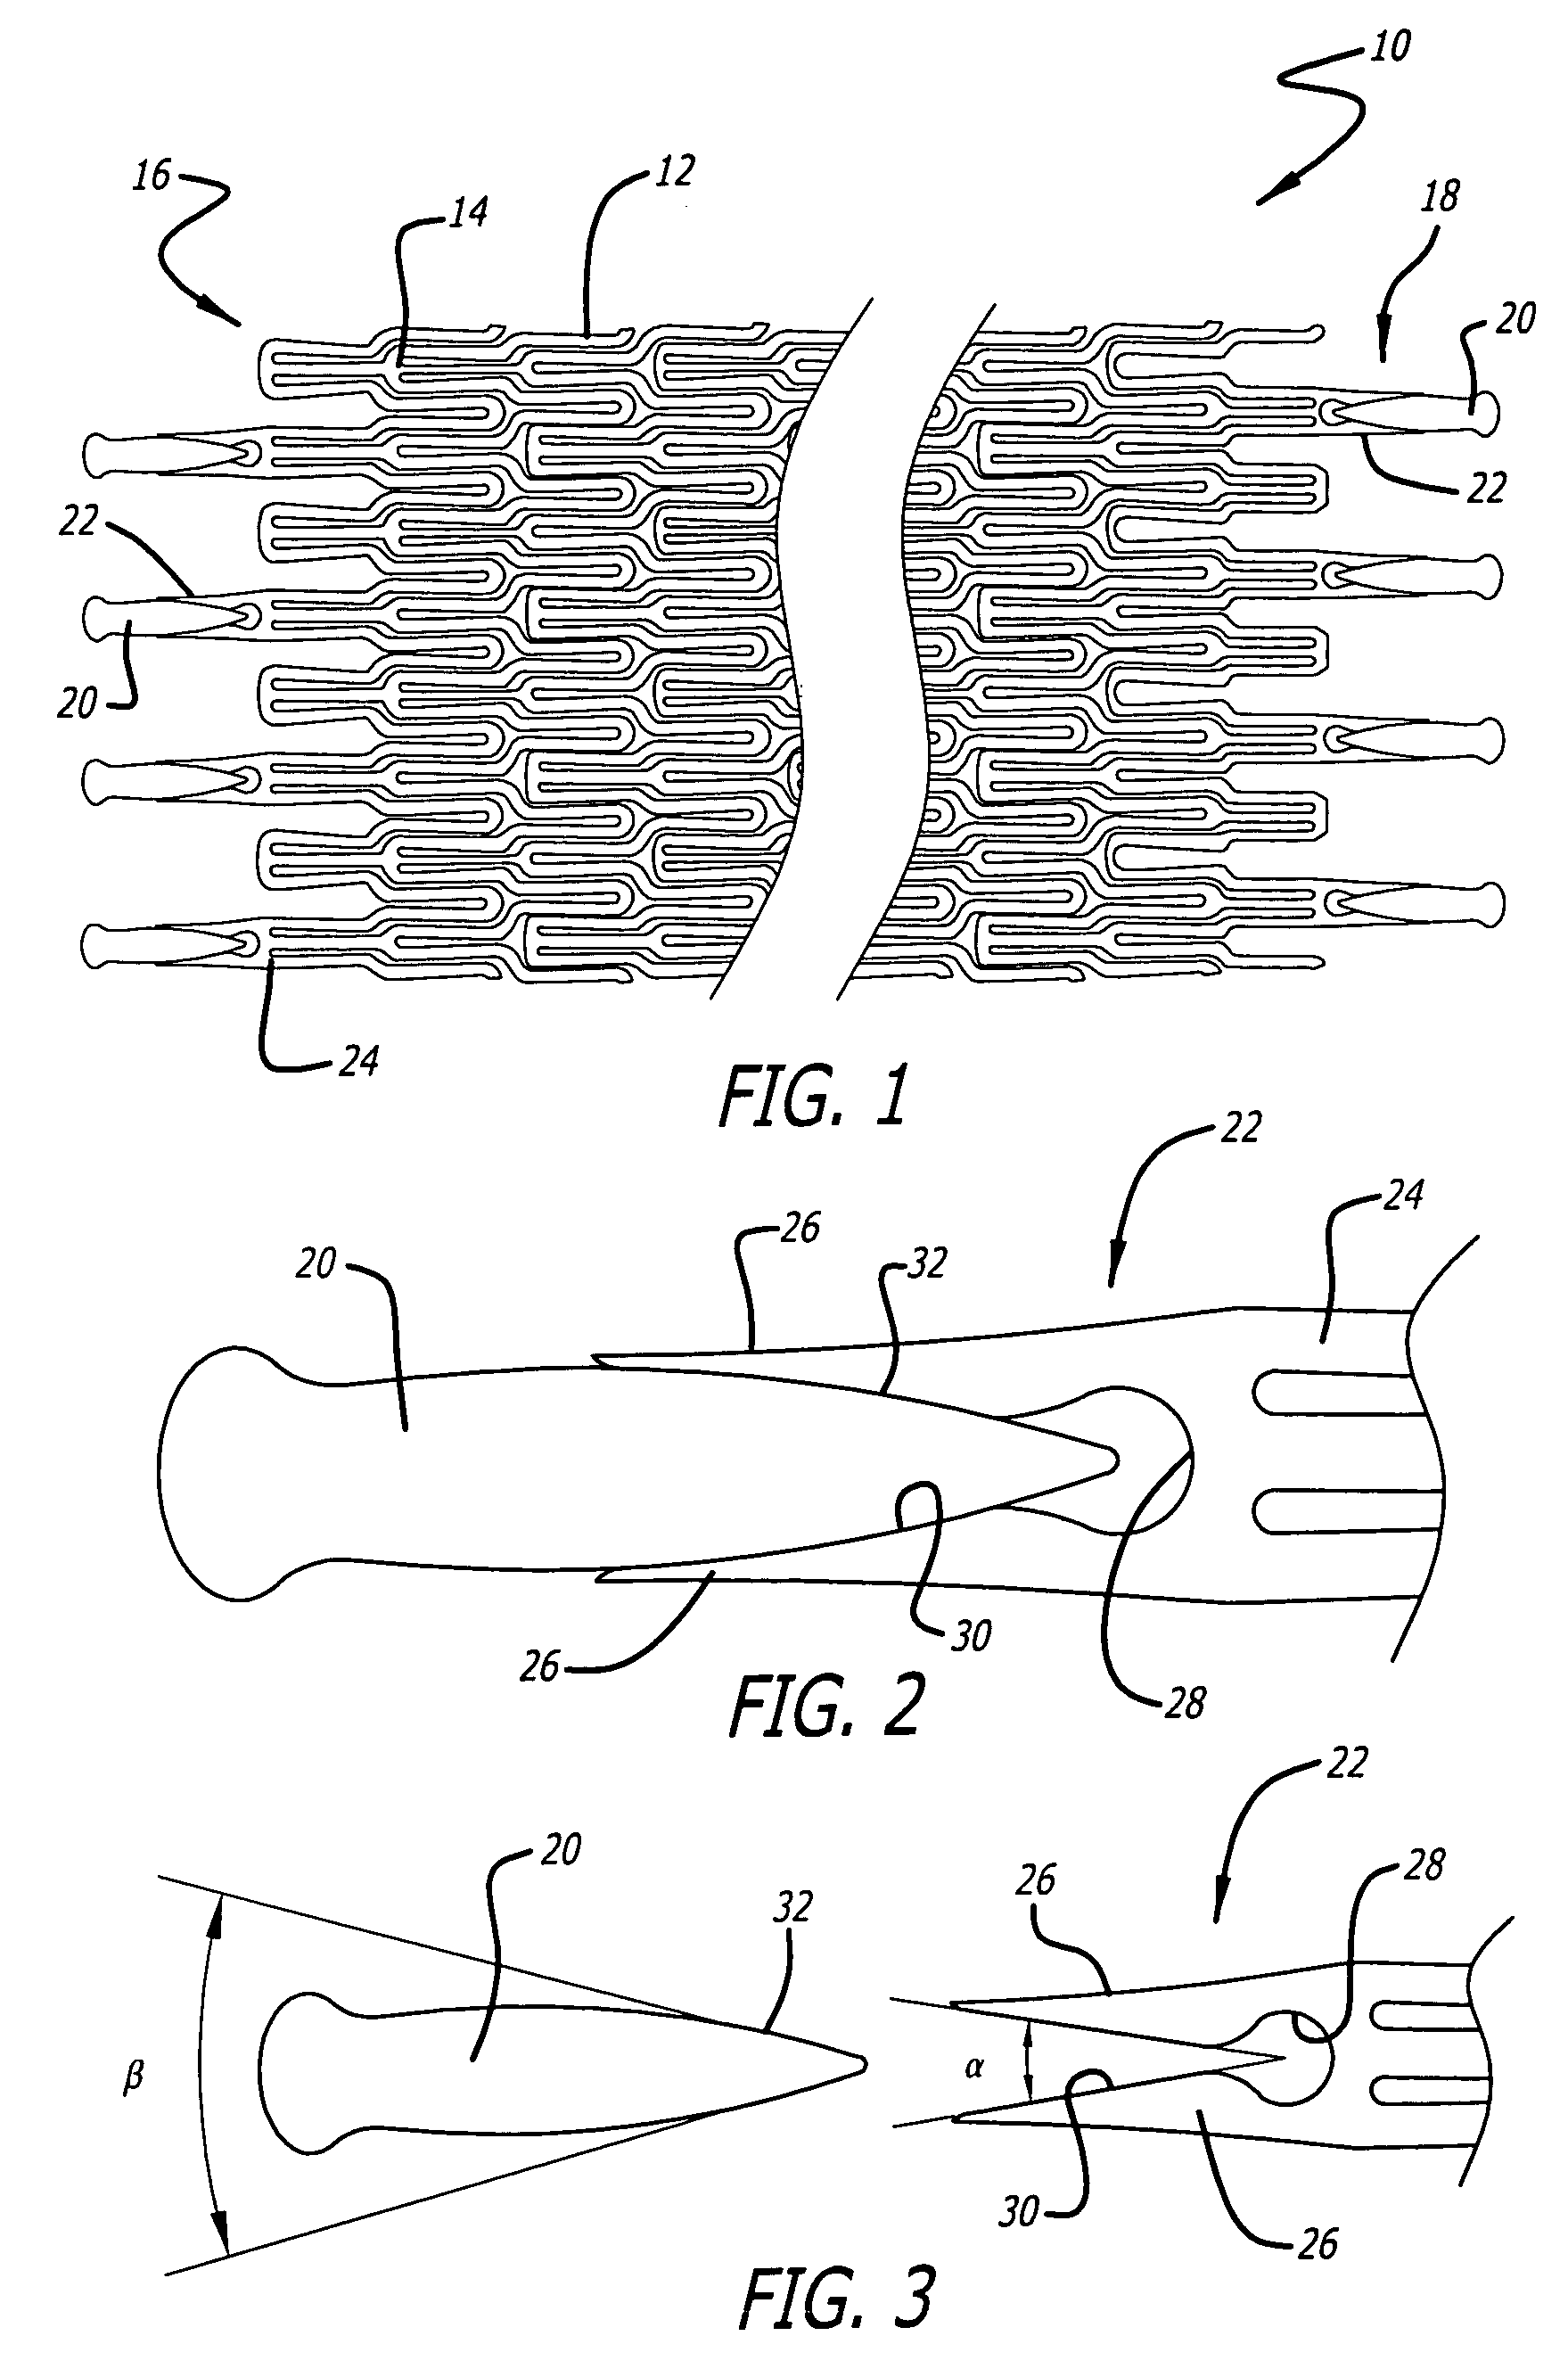 Radiopaque markers for medical devices